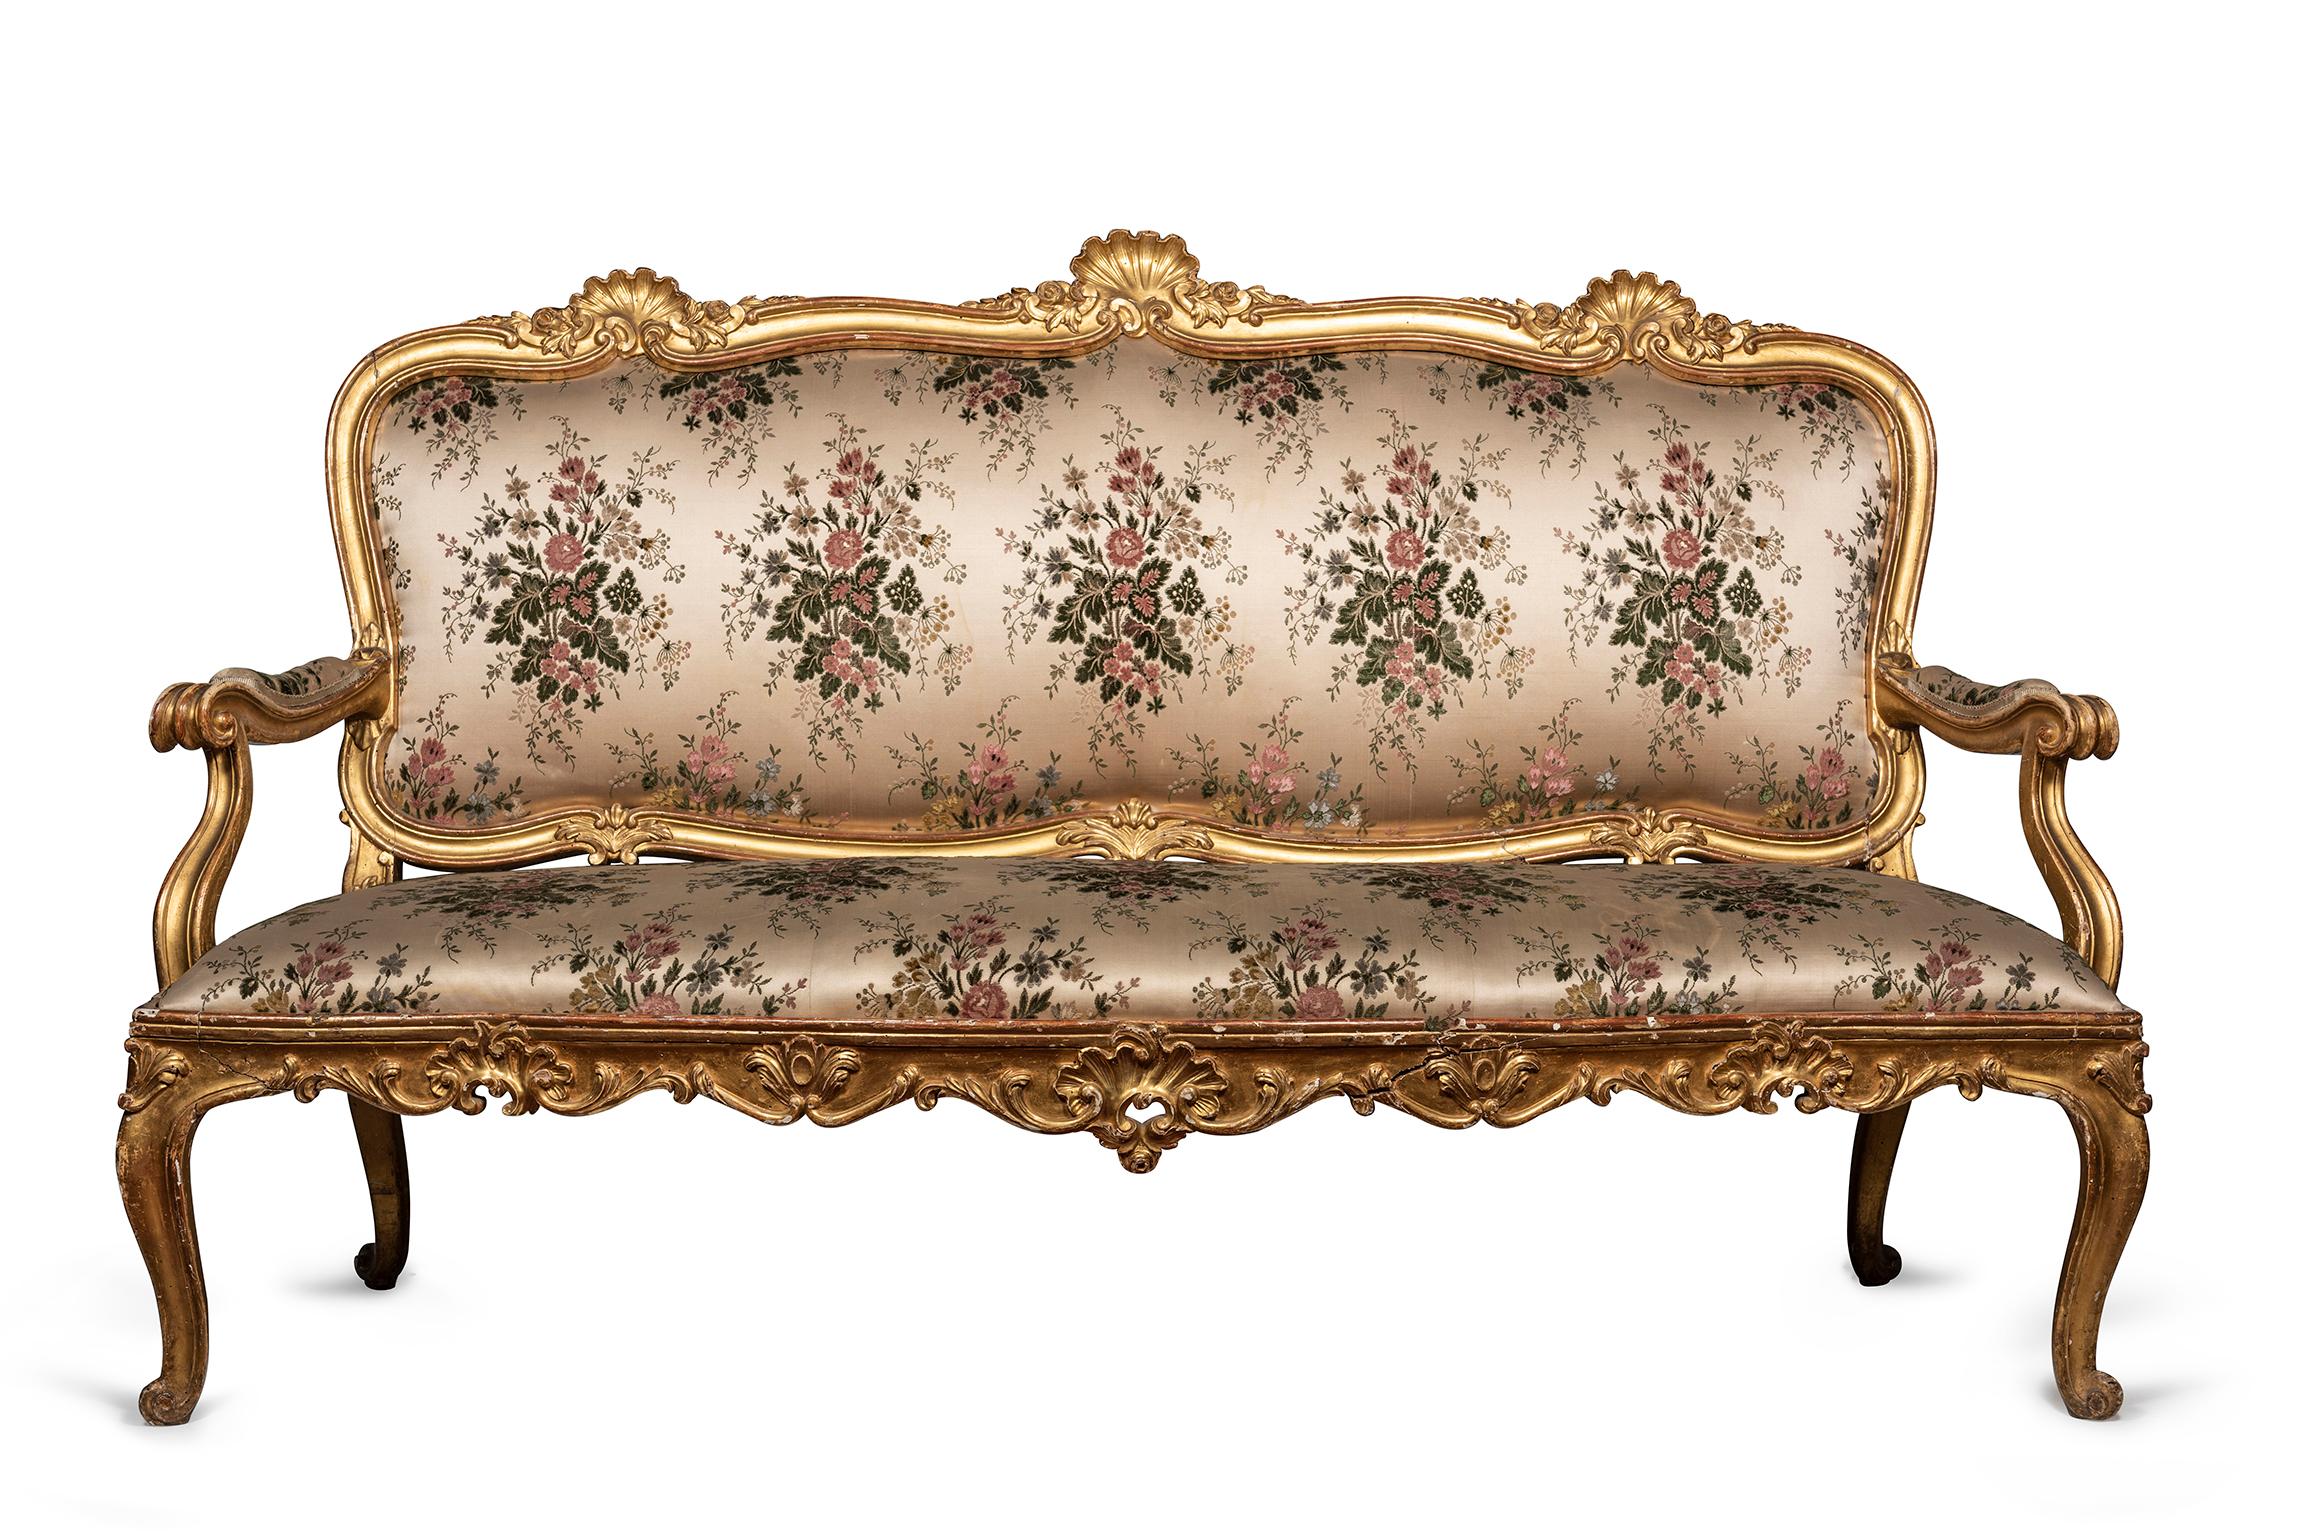 Comprised of a three-seat canapé and pair of fauteuils, the exposed giltwood frames decorated with rocailles, rosettes, acanthus and C-scrolls, the cartouche back, seats and padded arms upholstered in pale pink silk, embroidered with repeating